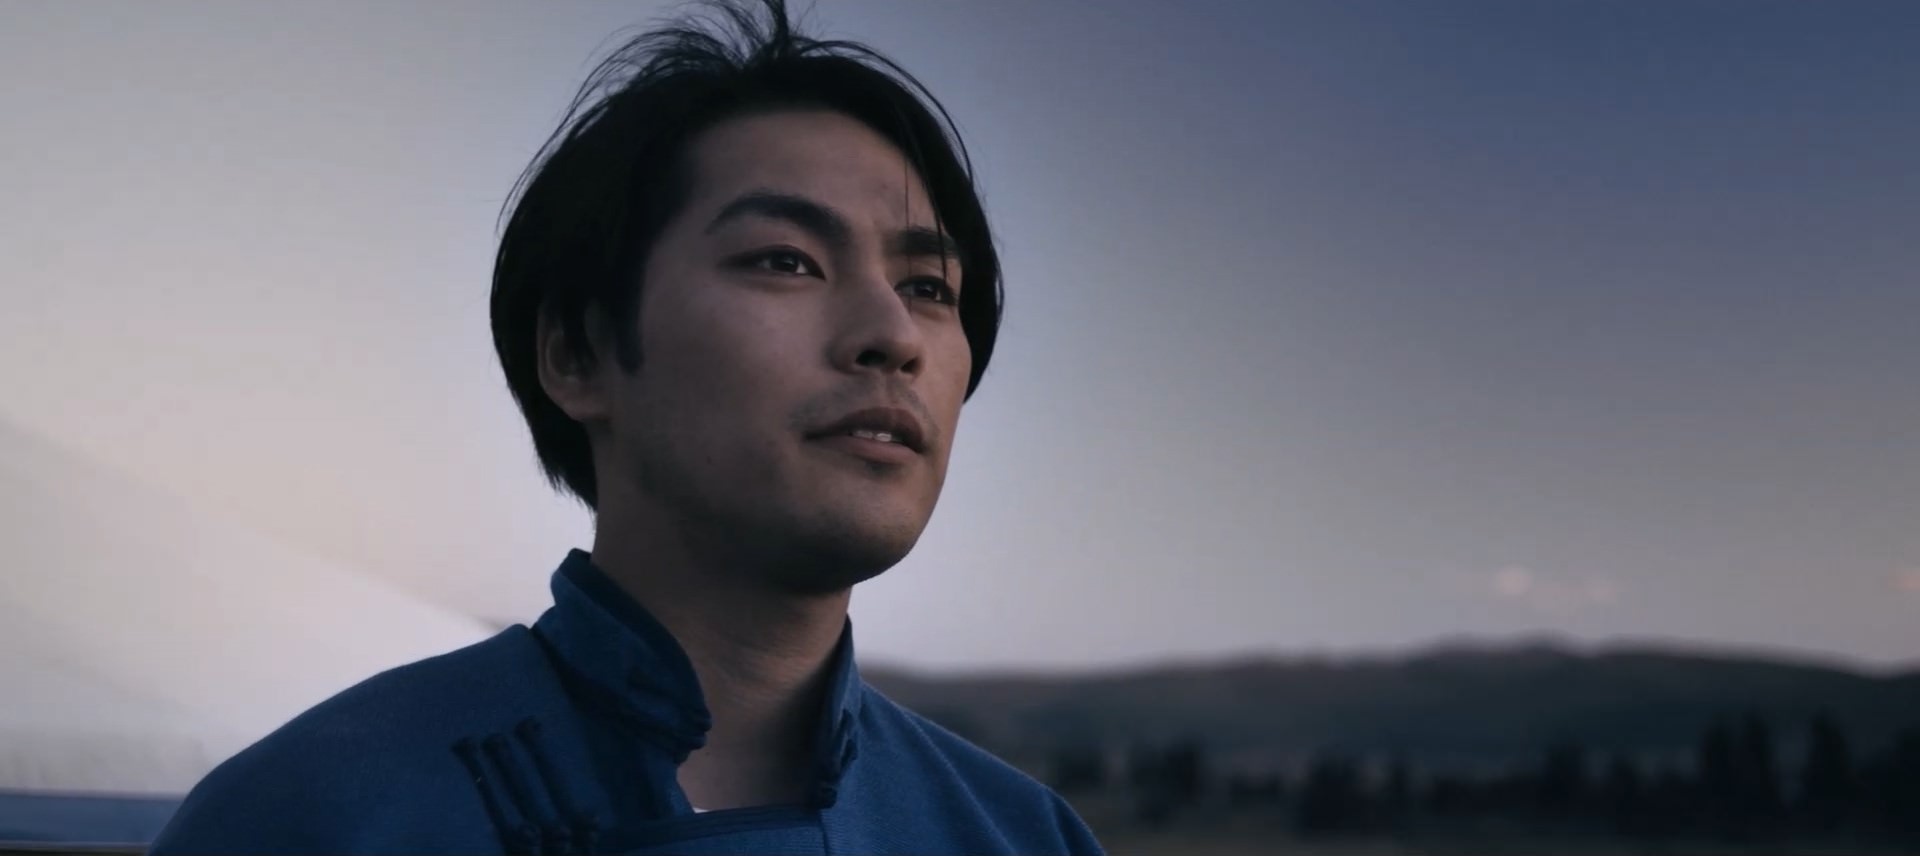 Yûya Yagira as Takeshi in film, 'Under the Turquoise Sky'. Photo Credit: © Turquoise Sky Film Partners, IFI Production, KTRFILMS